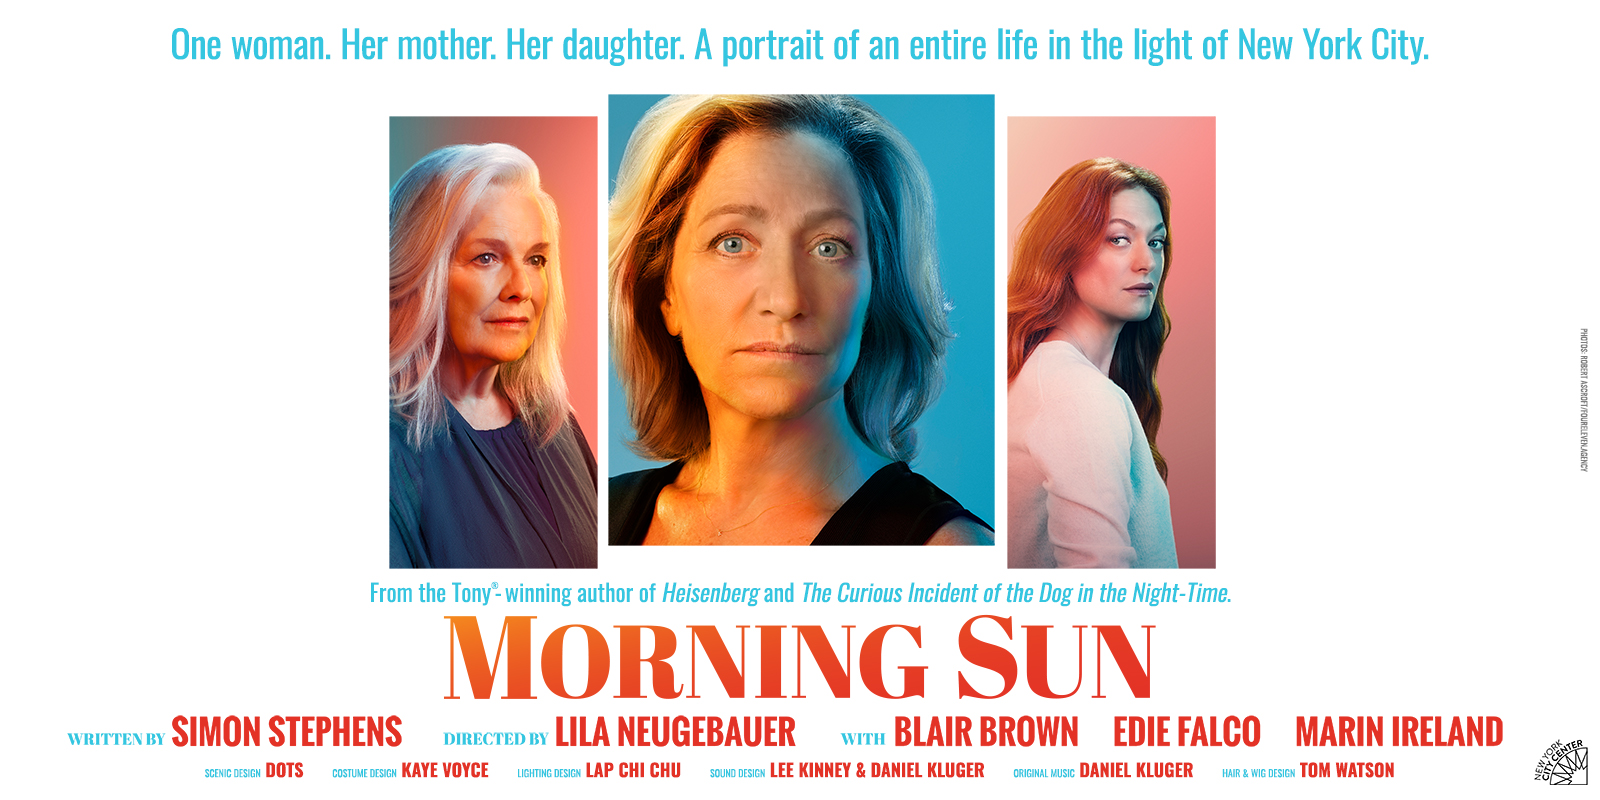 One woman. Her mother. Her daughter. A portrait of an entire life in the light of New York City. Morning Sun